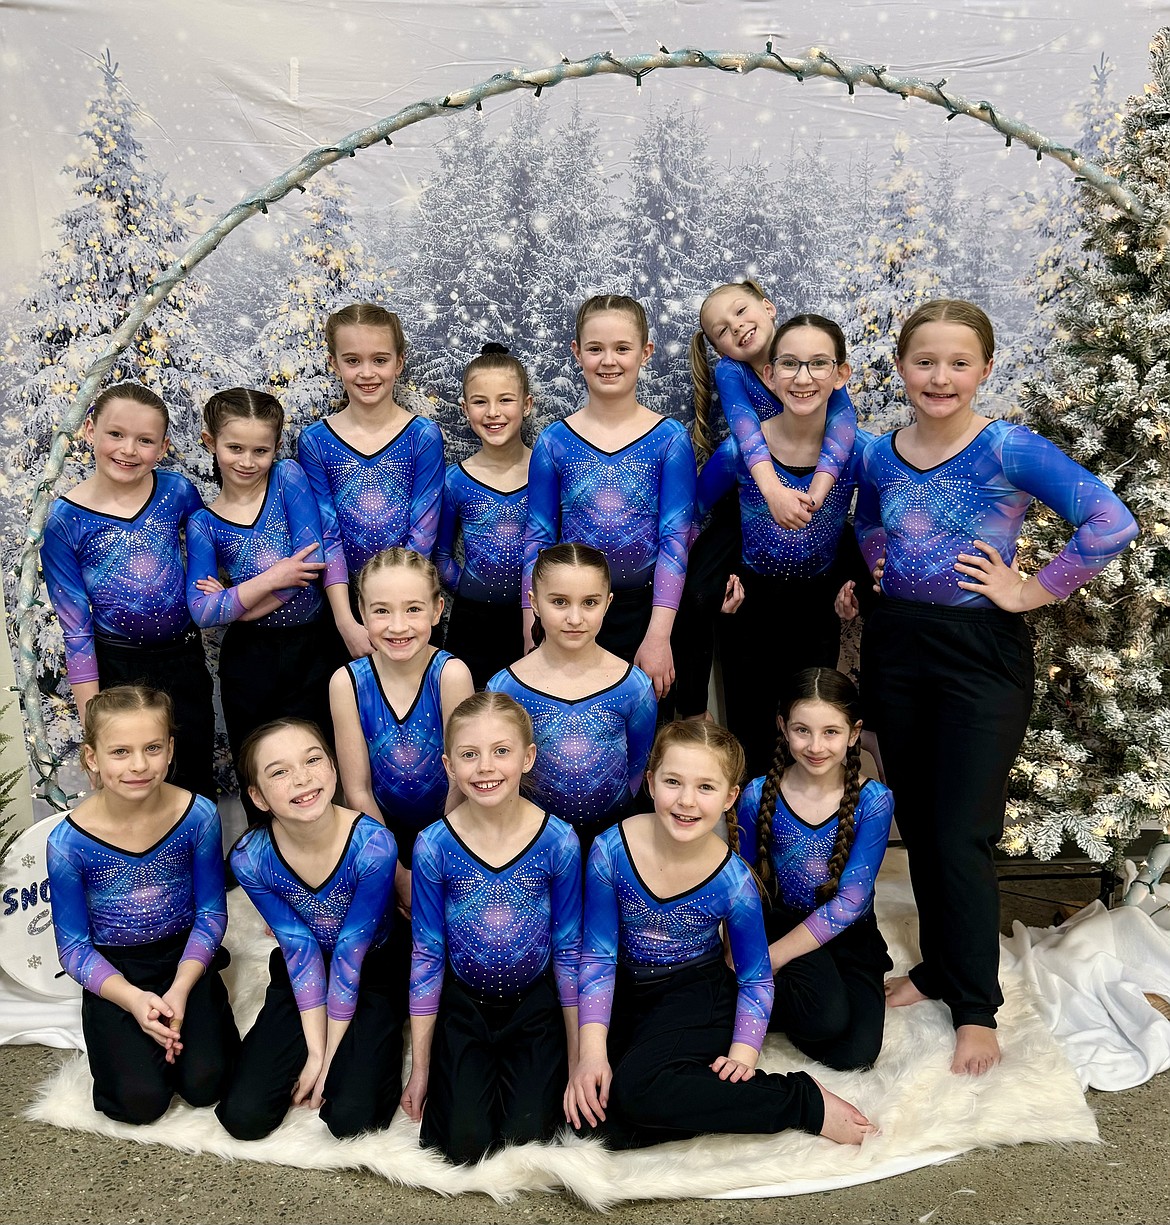 Courtesy photo
GEMS Athletic Center Bronze Team placed 3rd Place as a team t the Snowglobe Classic in Post Falls on March 8-10. In the front row from left are Raegan Zimmerman, Myla South, Evie Bowman and Lauren Inglehart; second row from left, Kinley Simpson, Liliahna Dunton and Isabel Lunneborg; and back row from left, Grace Ohlenkamp, Felicity Hammer, Finley Rauscher, Kristyn Frank, Lily Fulton, Stella Cahoon (on Ellie Hill’s back), and Raelyn Hazen.